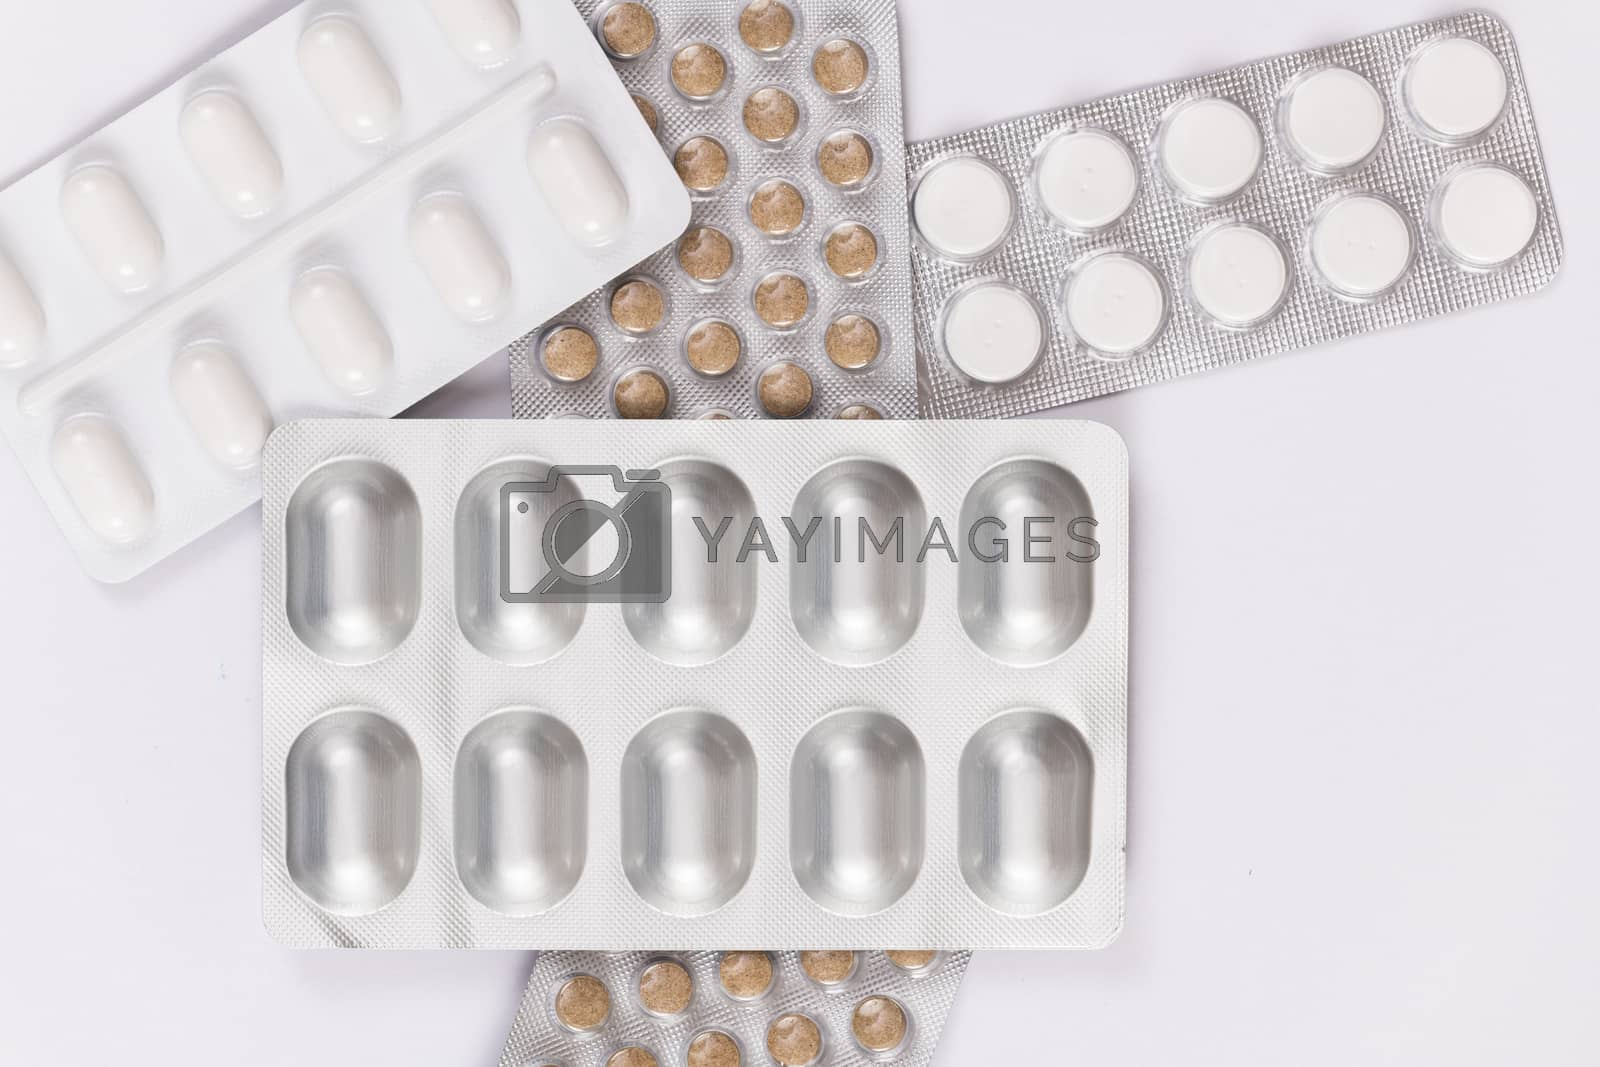 Royalty free image of Prescription Pills Packages by viscorp